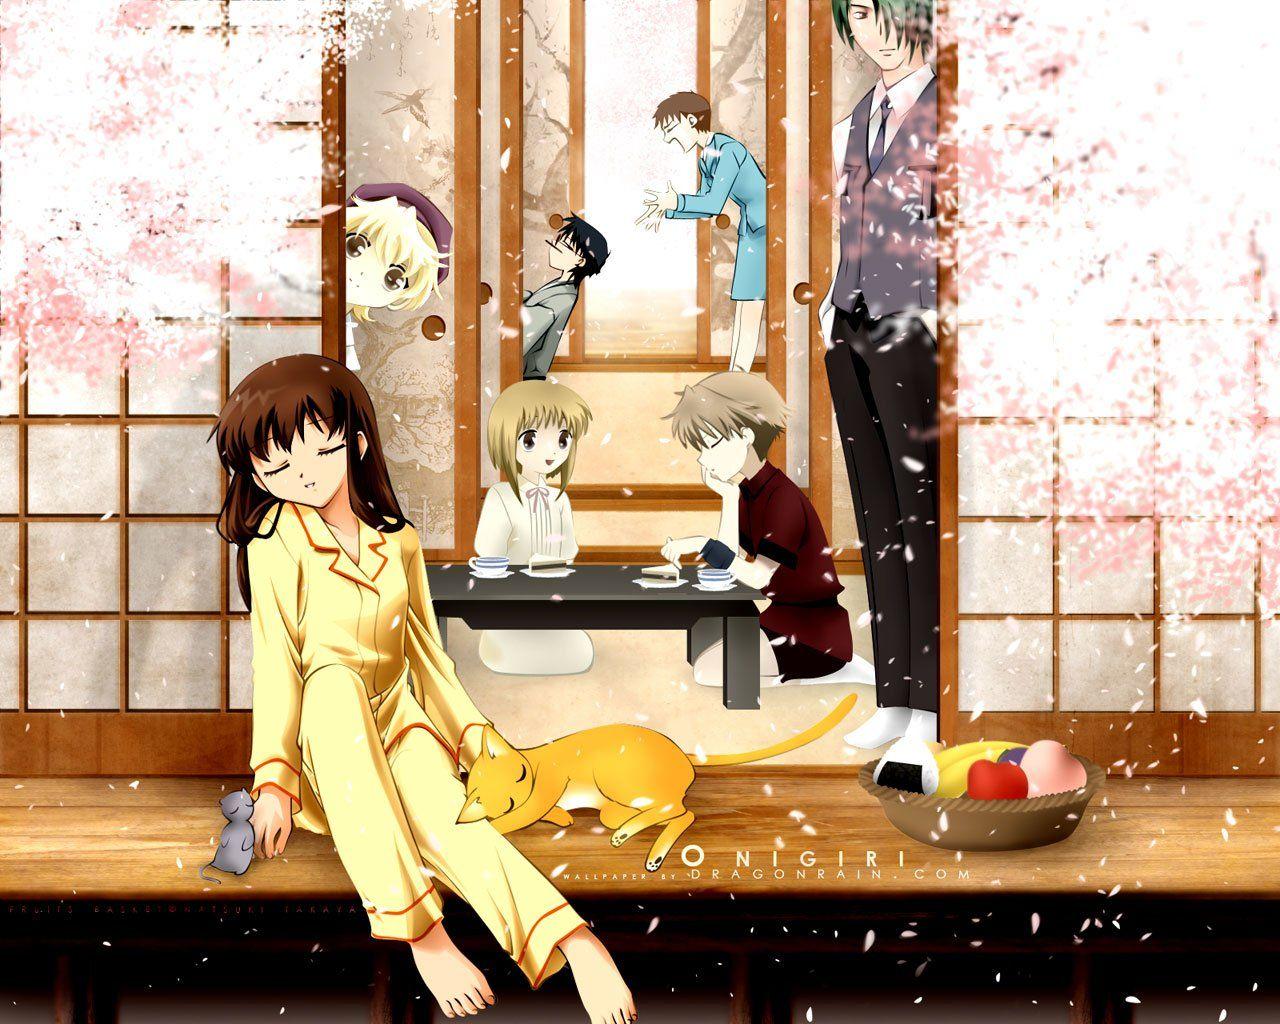 Fruits Basket Prelude Trailer Depicts Unseen Love Story